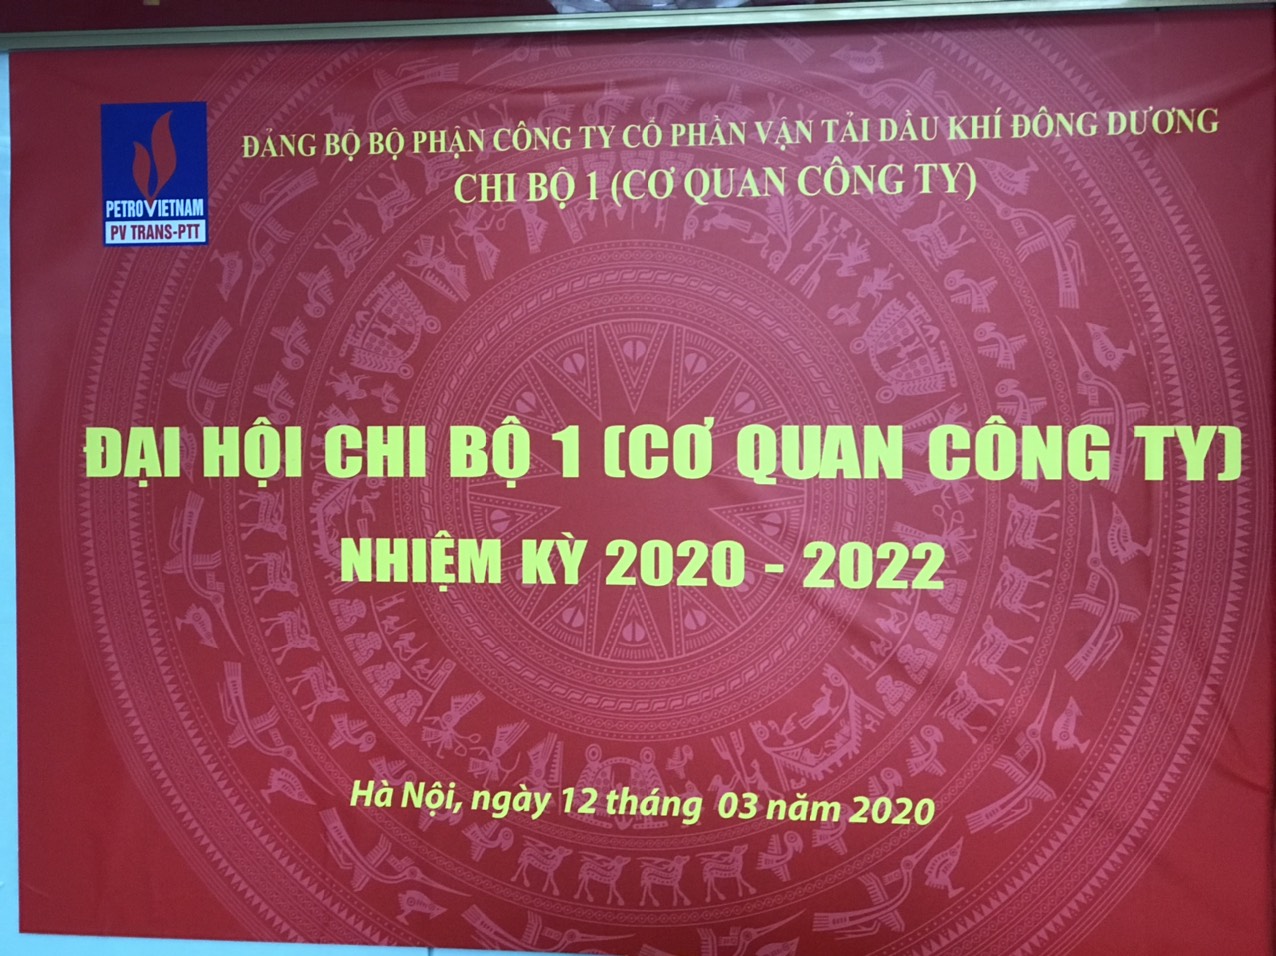 The 2nd Congress of Party Cell (Company Agency) for the term 2020-2022